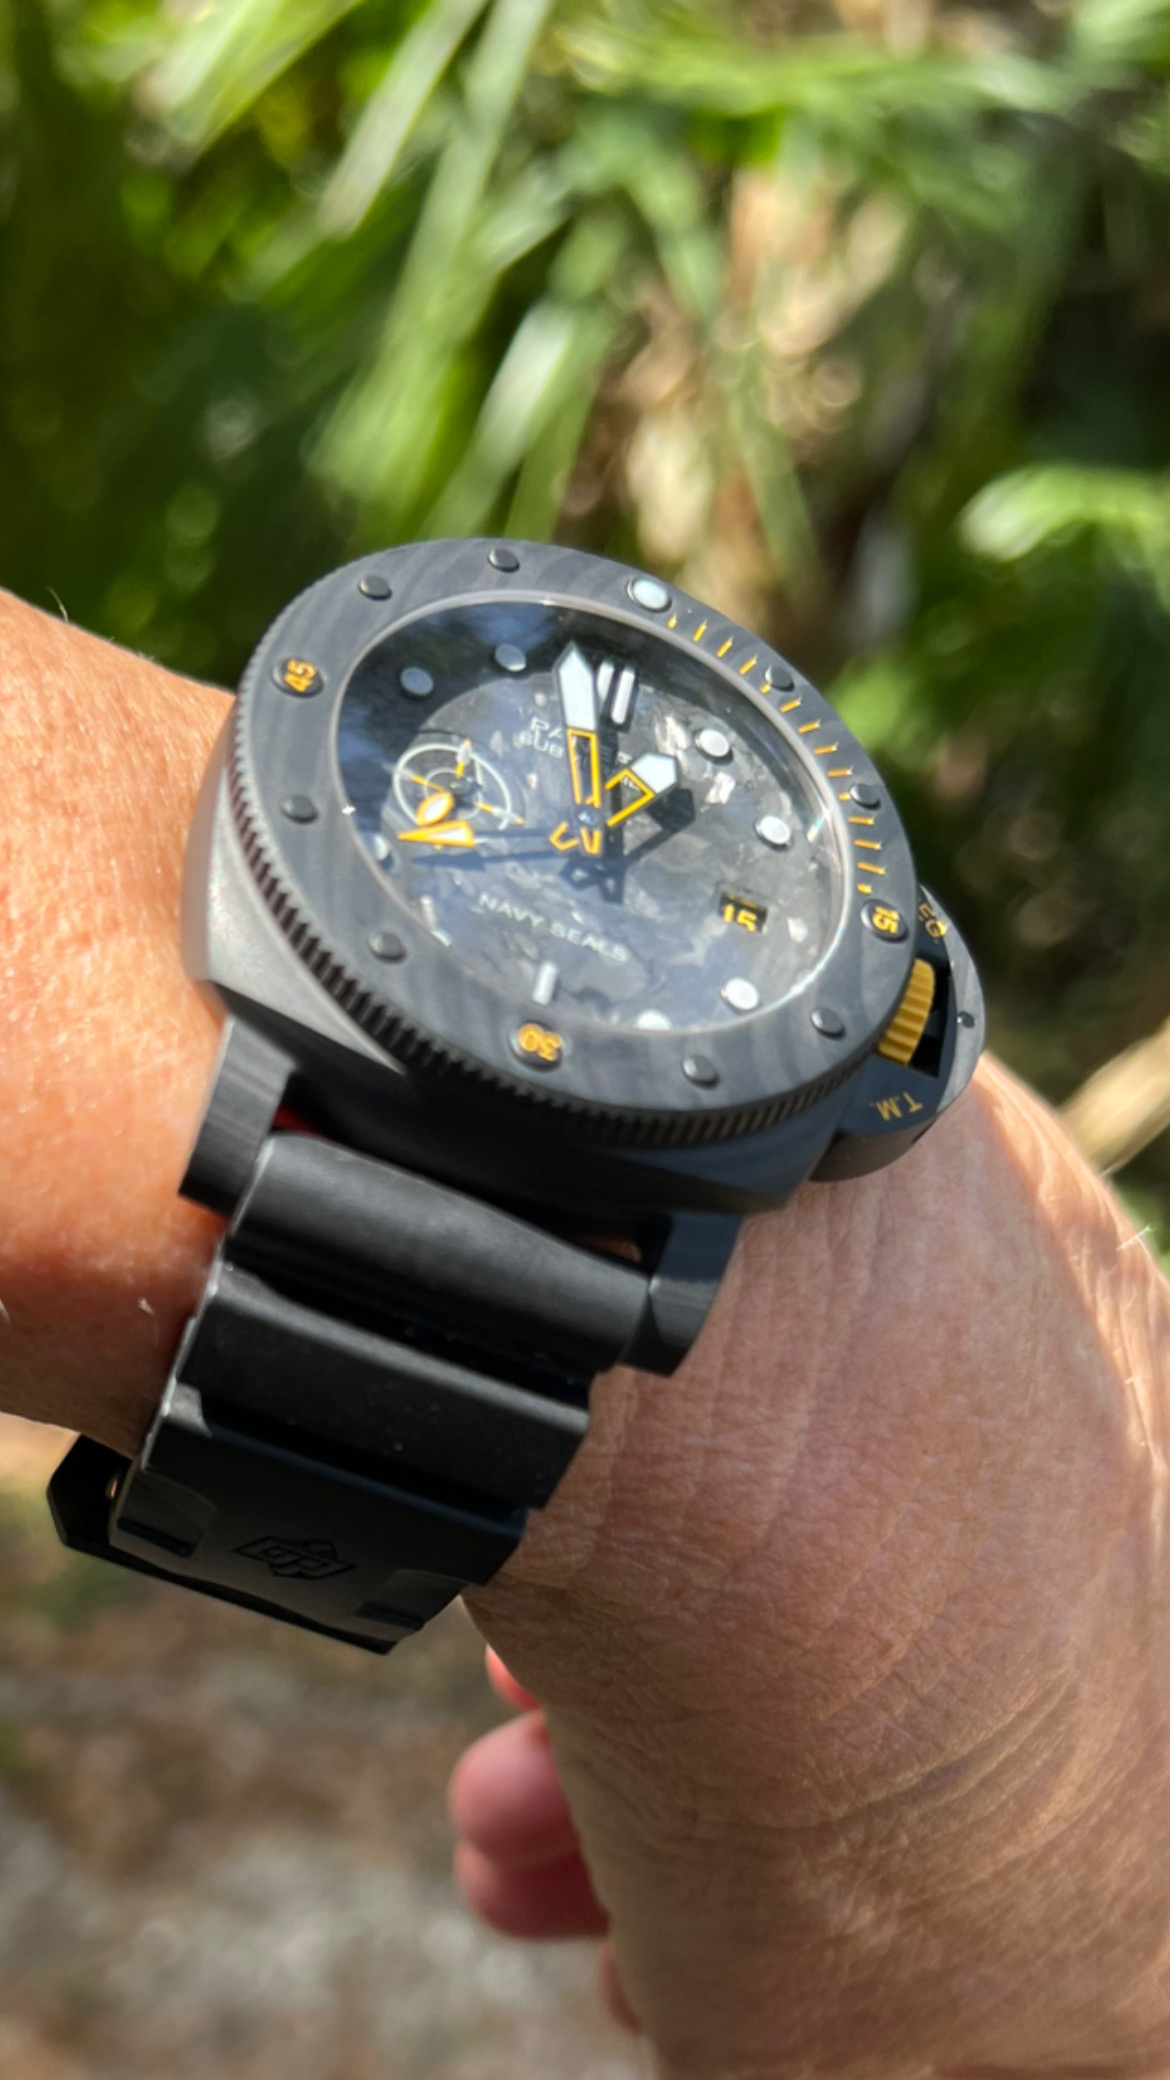 Panerai Pam 1324, Submersible Carbotech Special Operations watch honoring the Navy SEALs